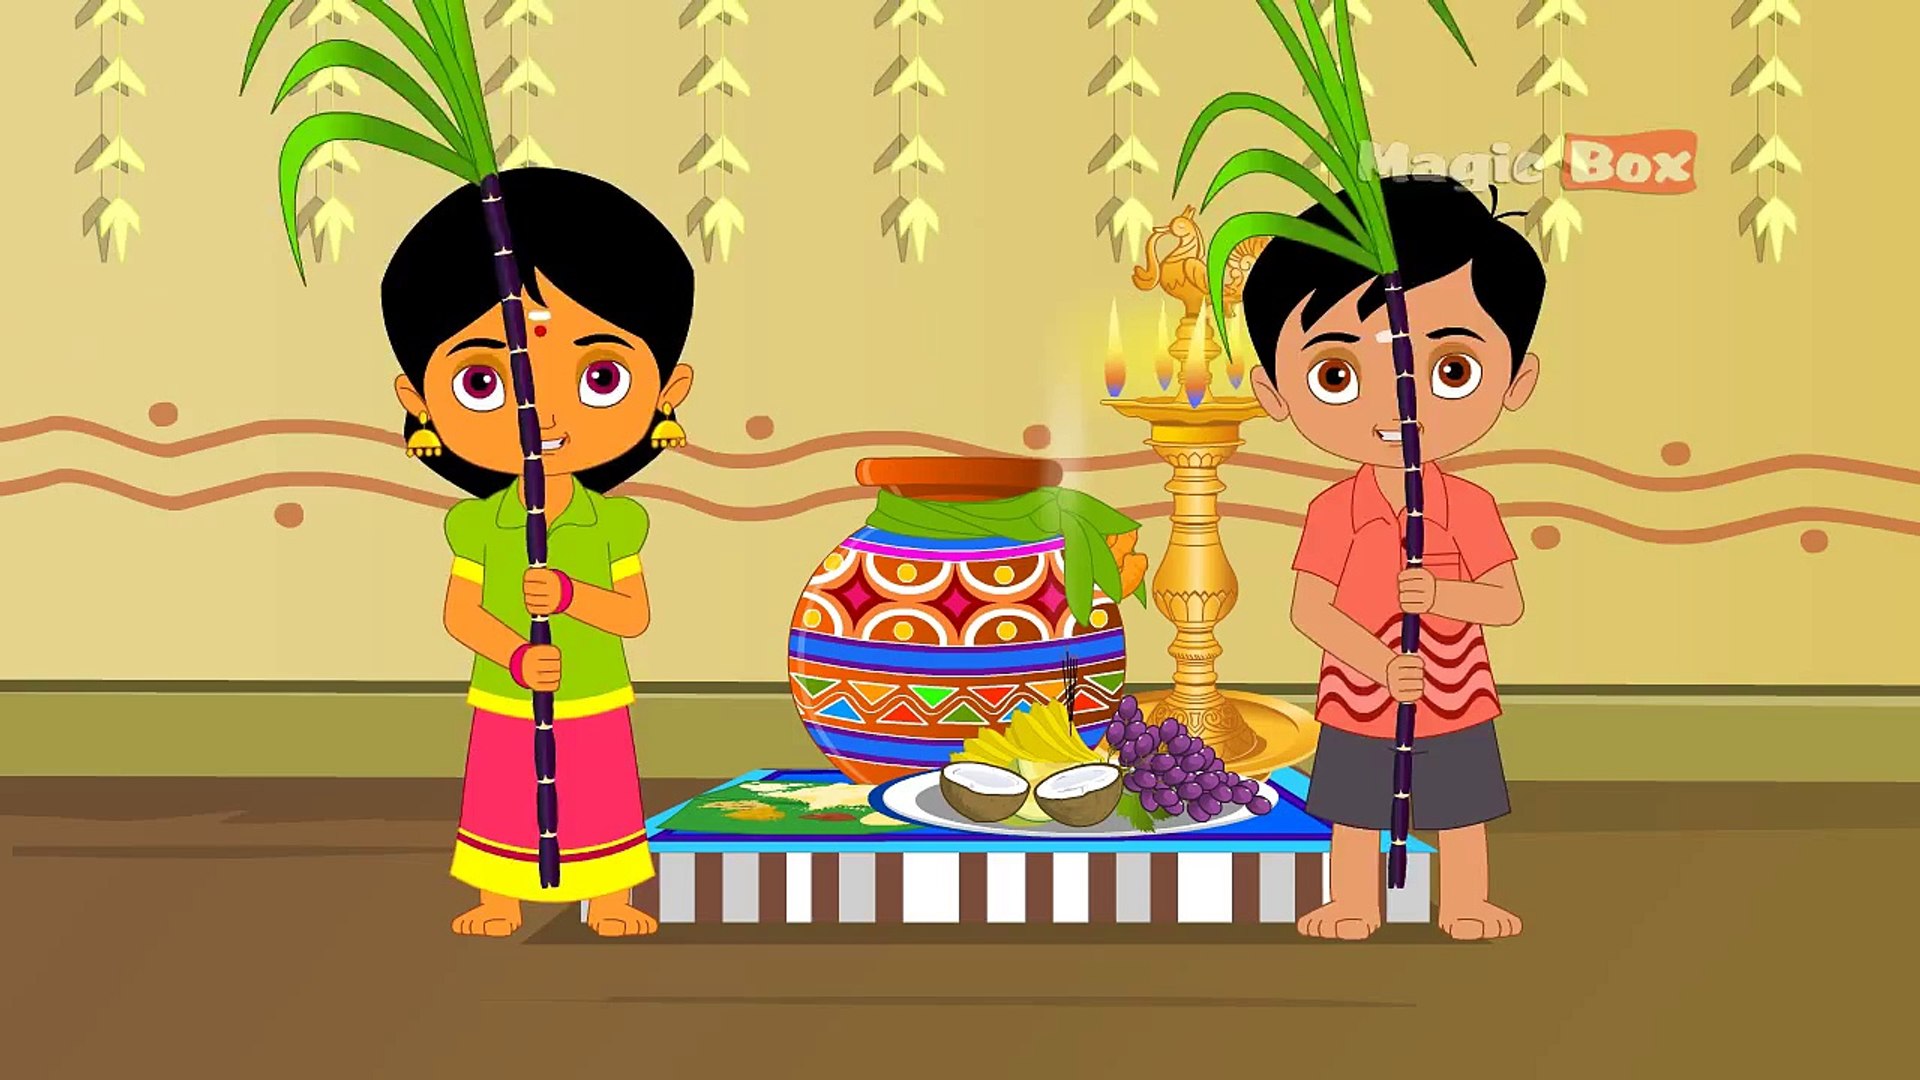 Vellai Ellam - Chellame Chellam Wishes you A Happy Pongal - Cartoon/Animated  Tamil Rhymes - Dailymotion Video